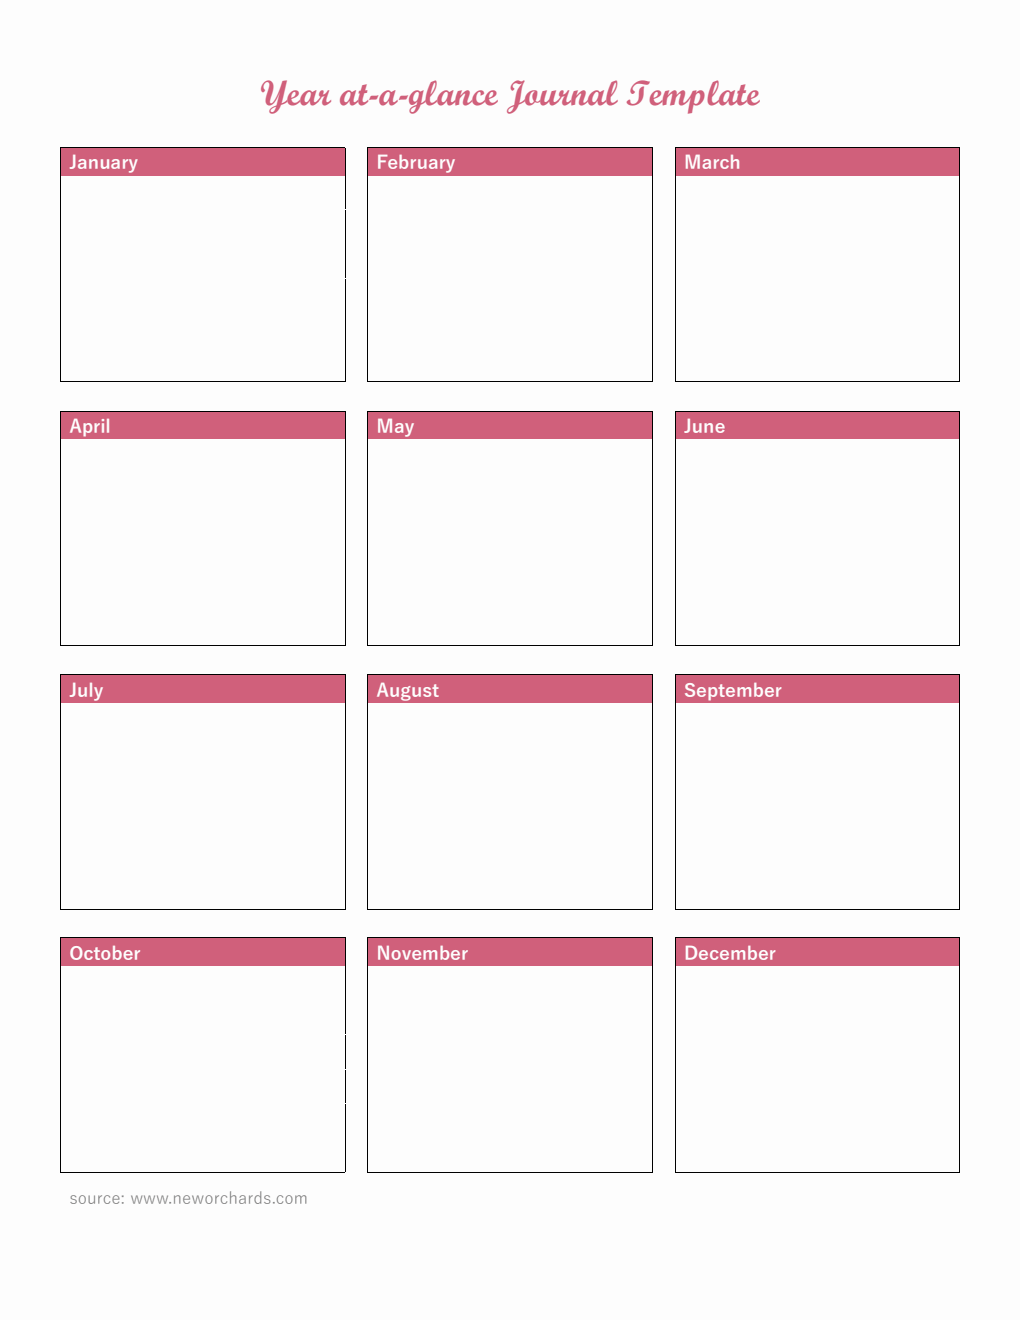 Basic Year at a Glance Template in Word